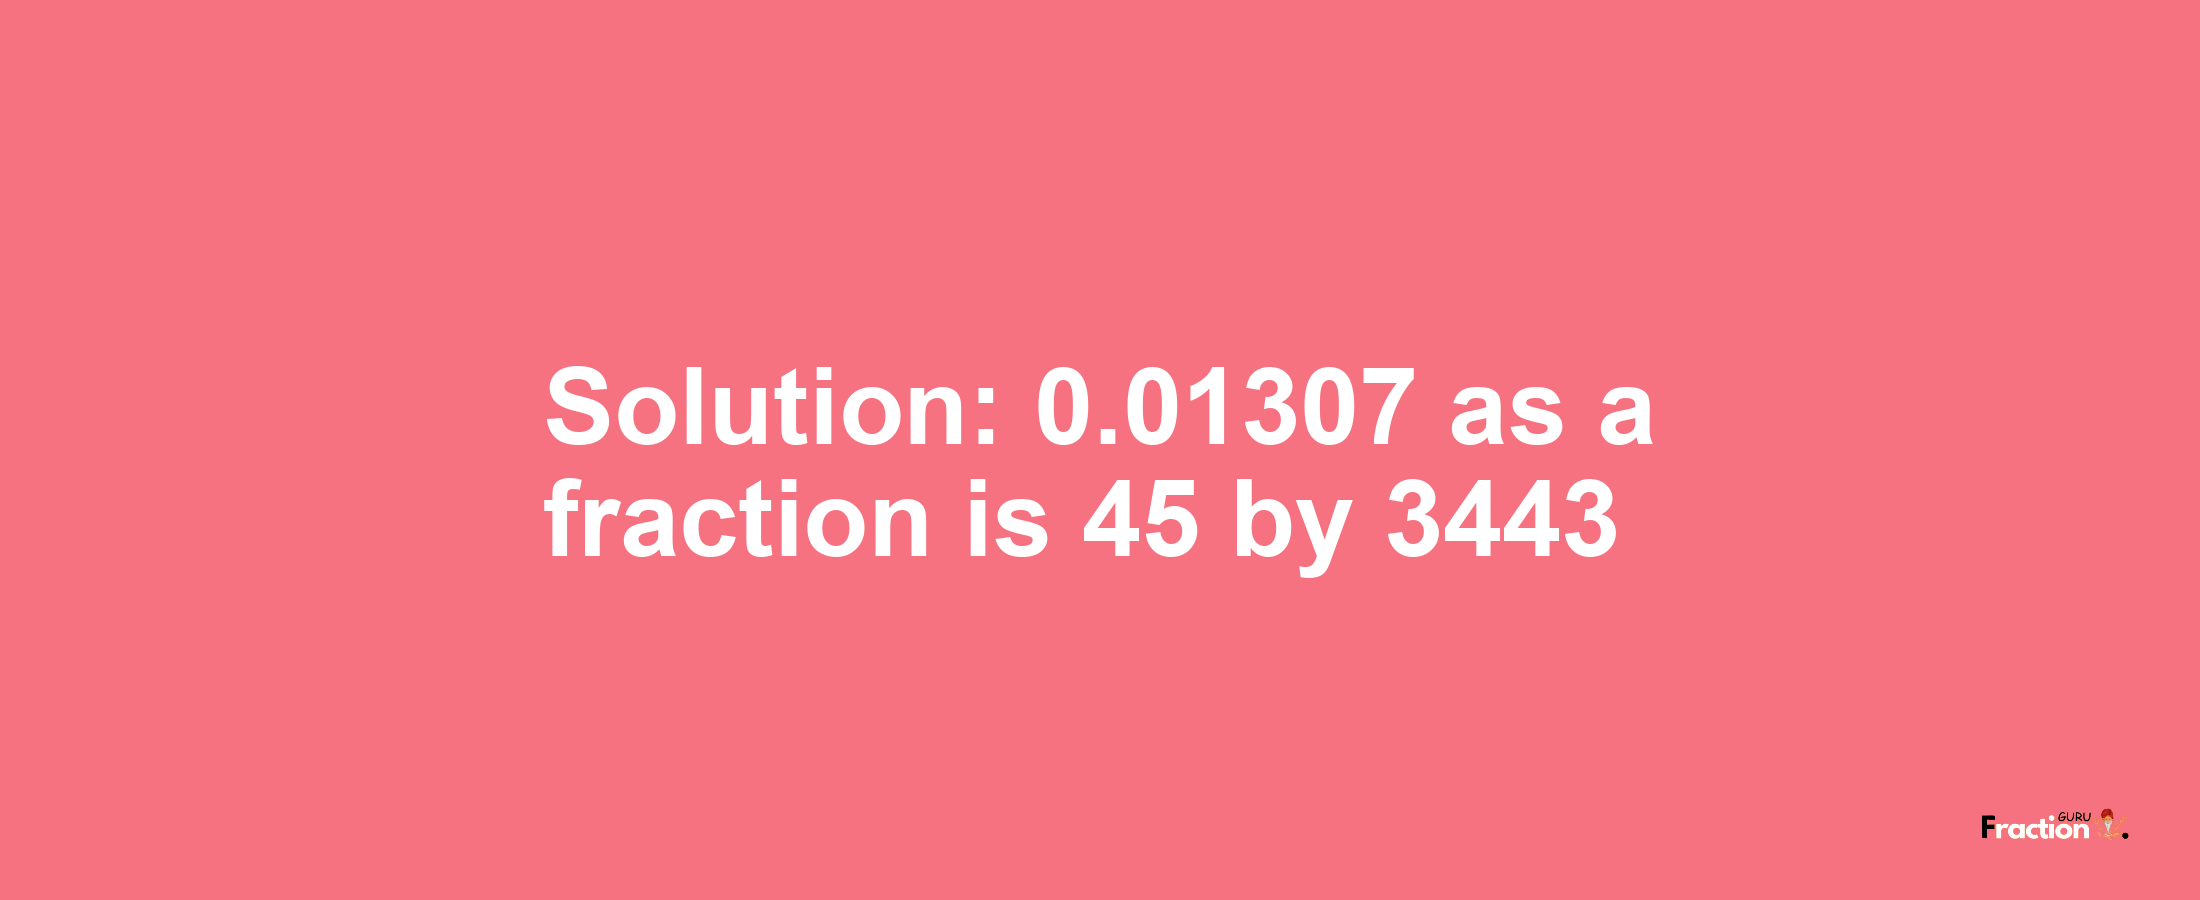 Solution:0.01307 as a fraction is 45/3443